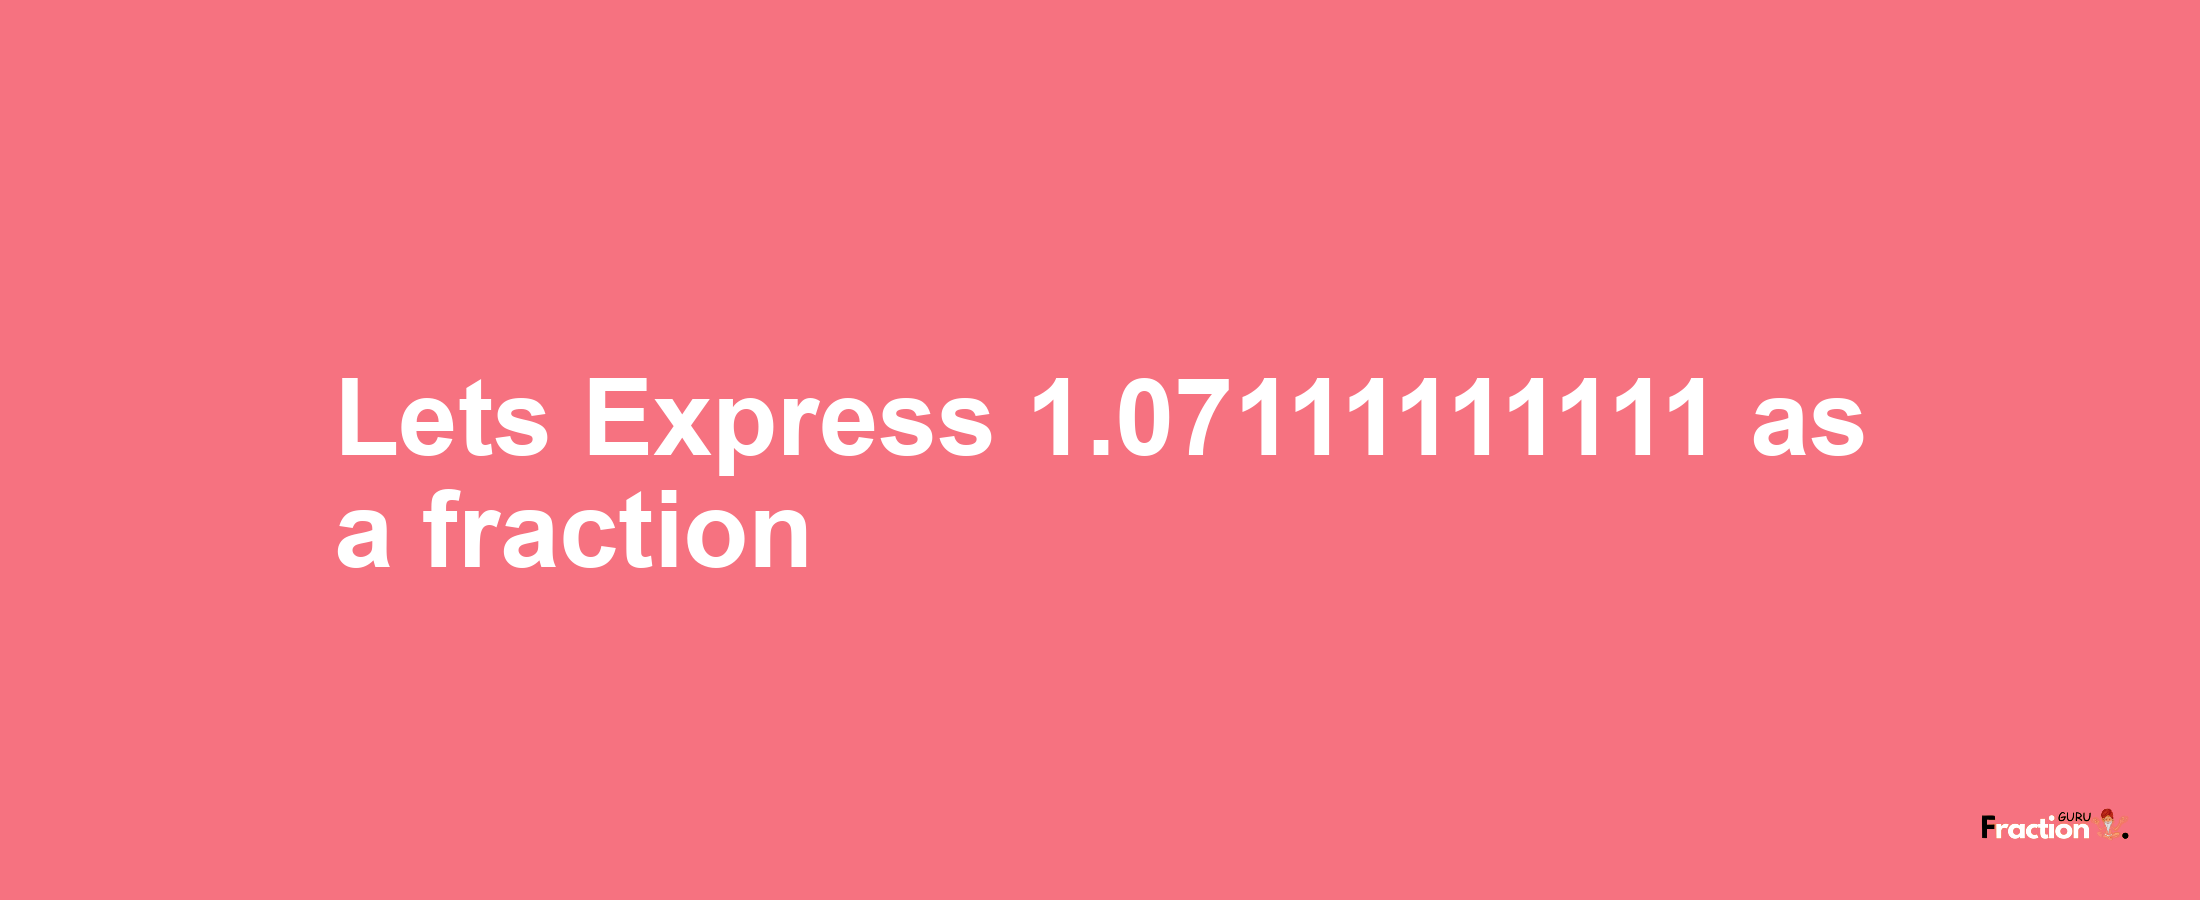 Lets Express 1.07111111111 as afraction